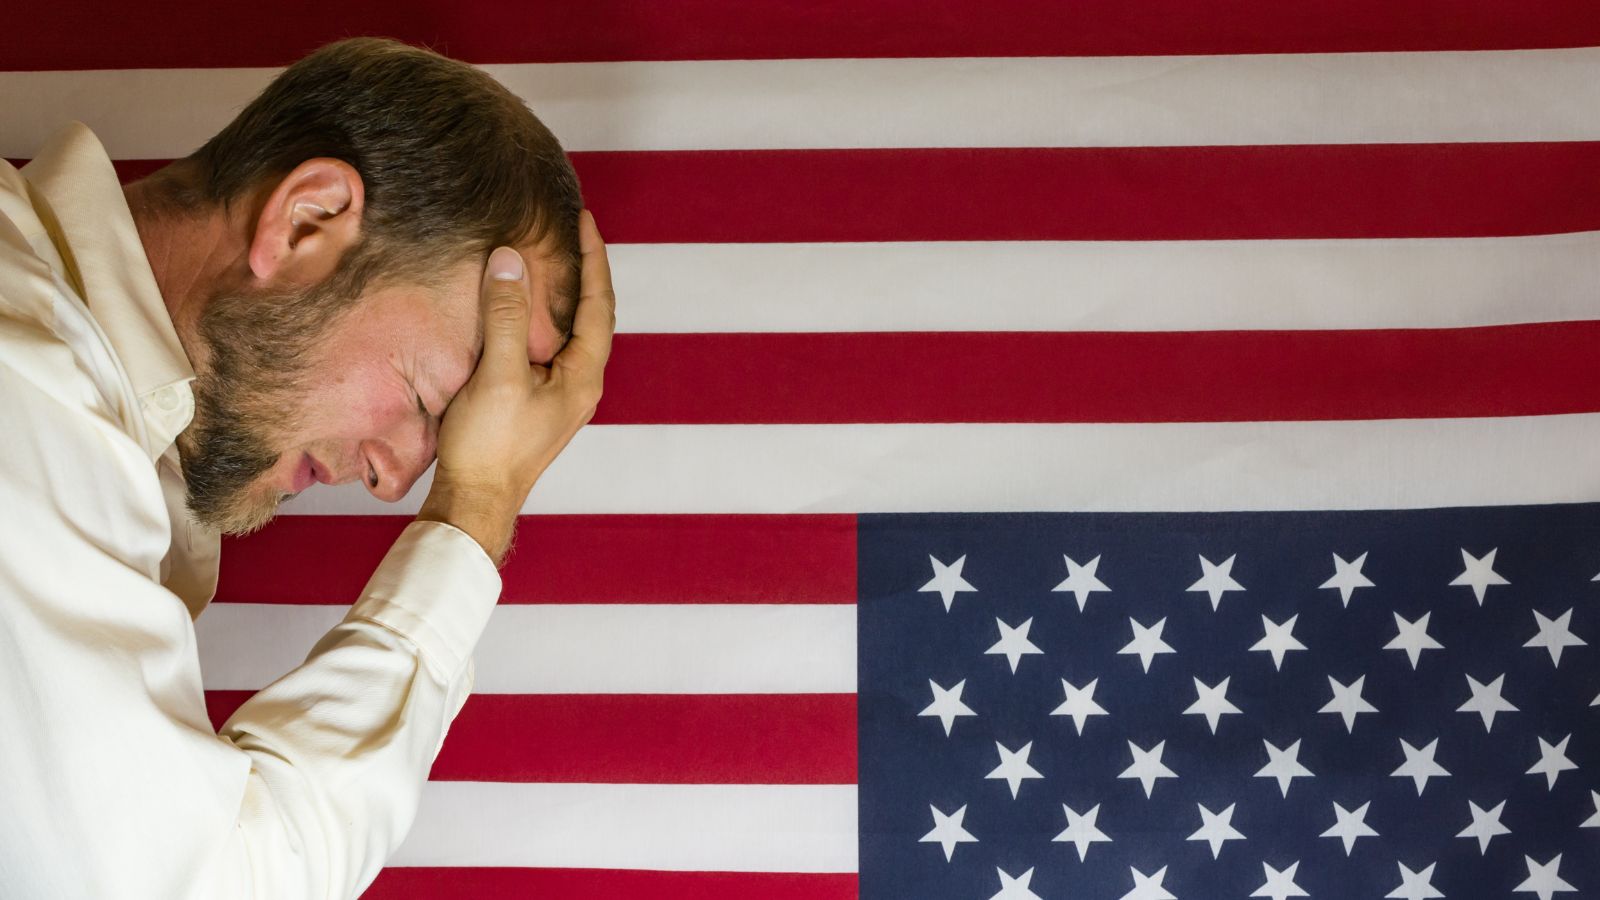 The Fall of Patriotism: 18 Insightful Reasons Behind Today’s Apathy